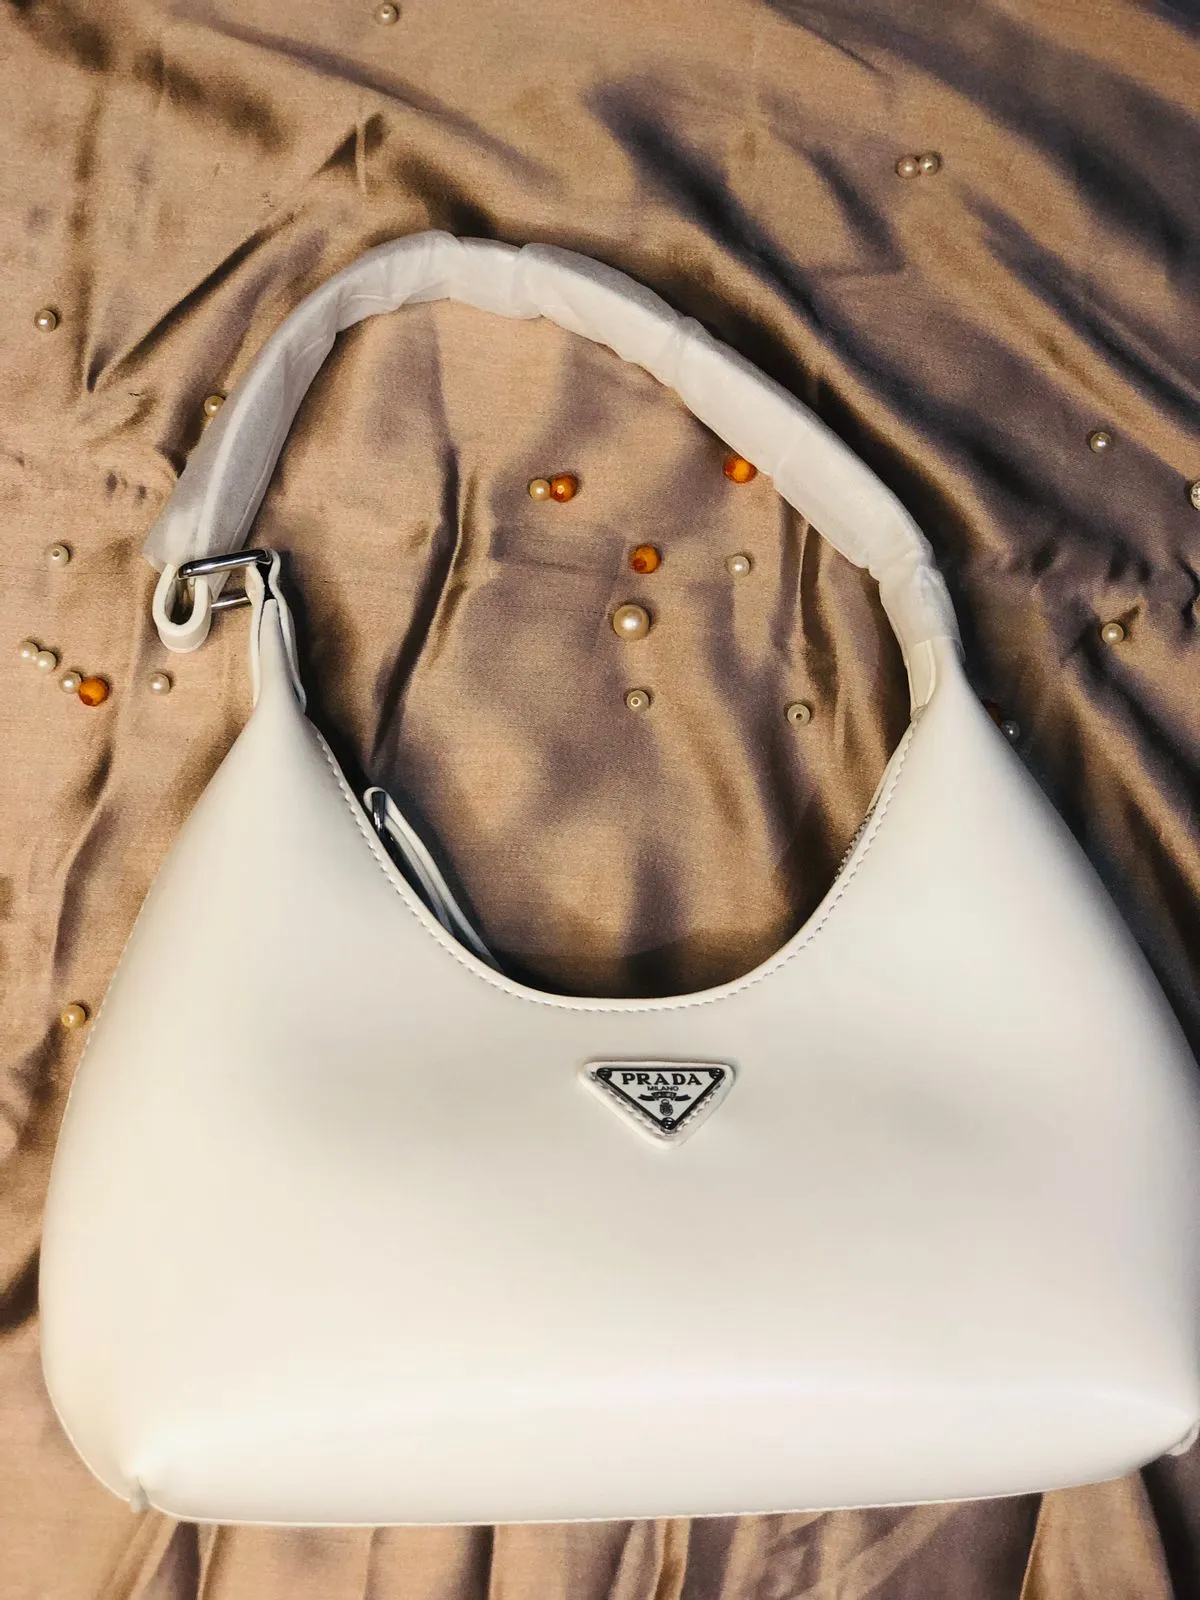 This image shows the Prada High Quality Shoulder Lady Armpit Adjustable Handle Bag sale on this website. #womensbag #imported #ladiesbag #bag.